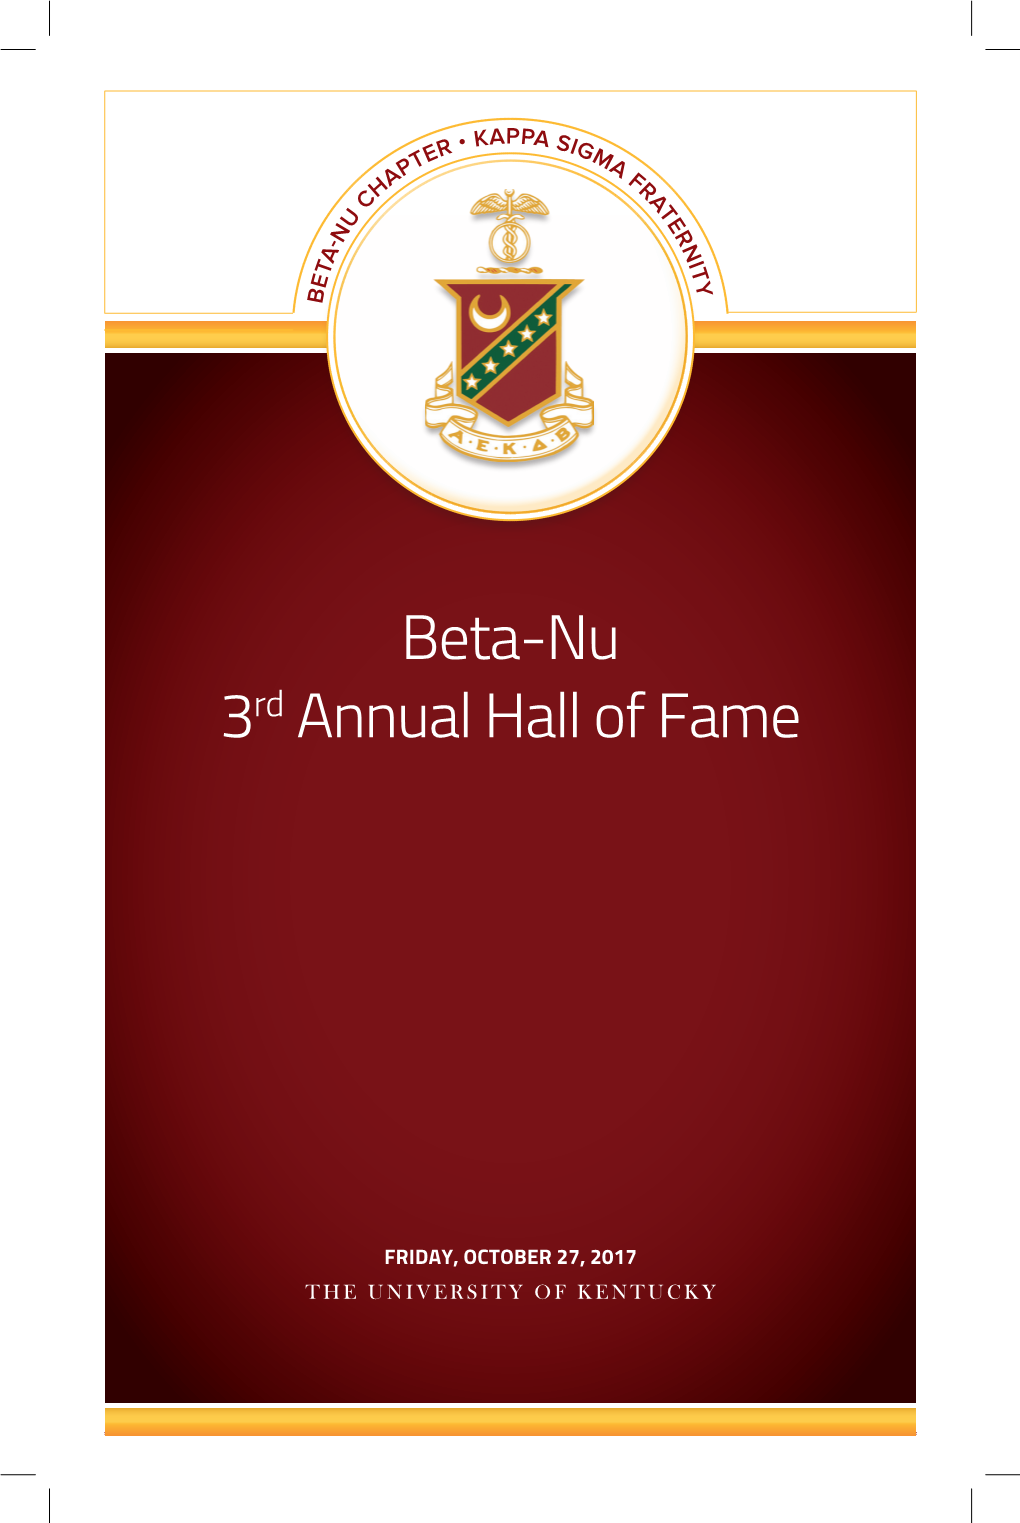 Beta-Nu 3Rd Annual Hall of Fame